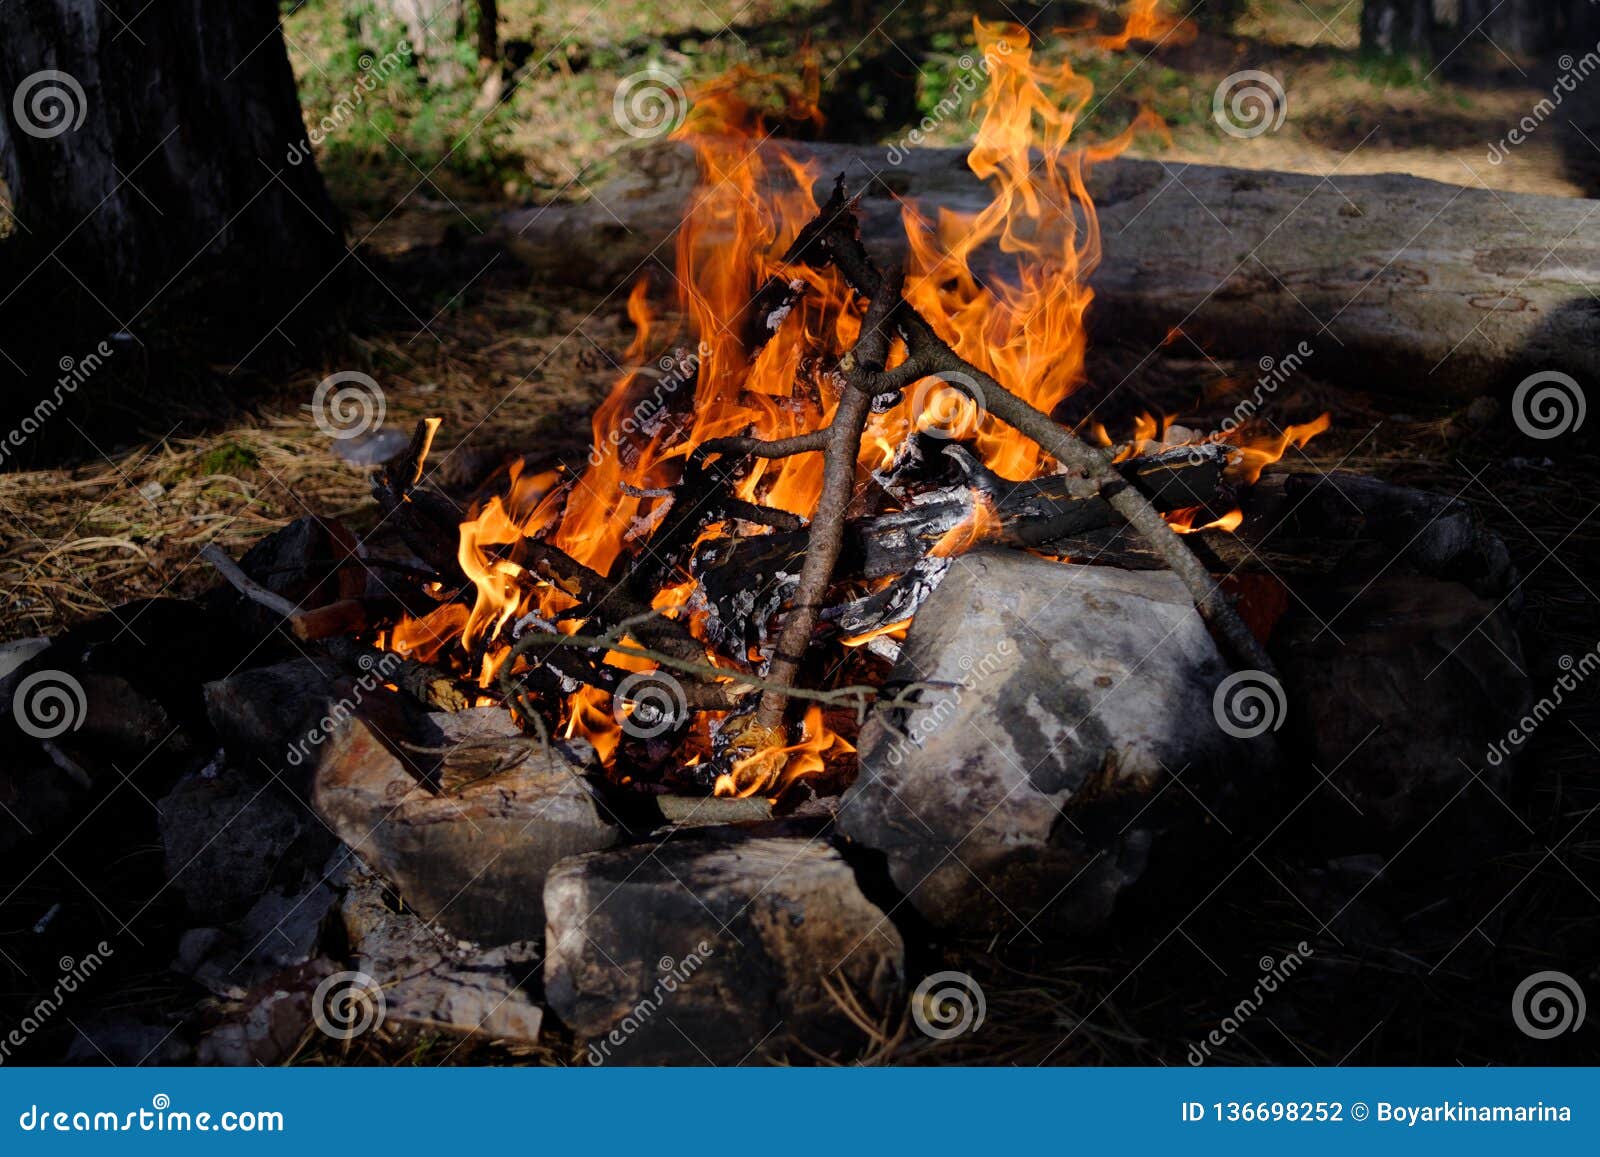 Bonfire in the Forest. Family Vacation, Camping or Picnic Stock Photo ...